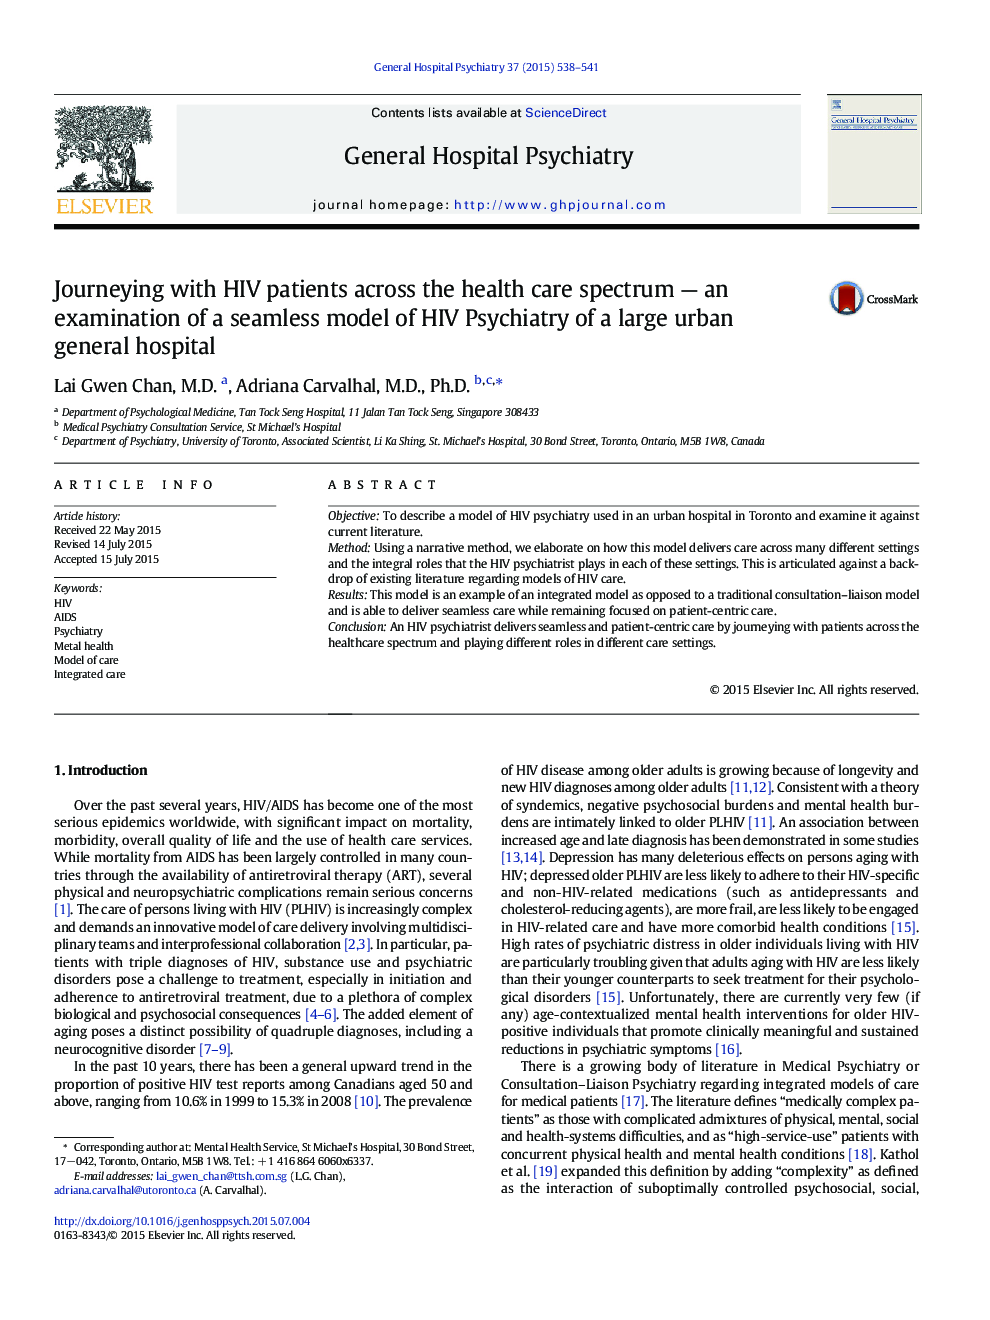 Psychiatric--Medical ComorbidityJourneying with HIV patients across the health care spectrum - an examination of a seamless model of HIV Psychiatry of a large urban general hospital